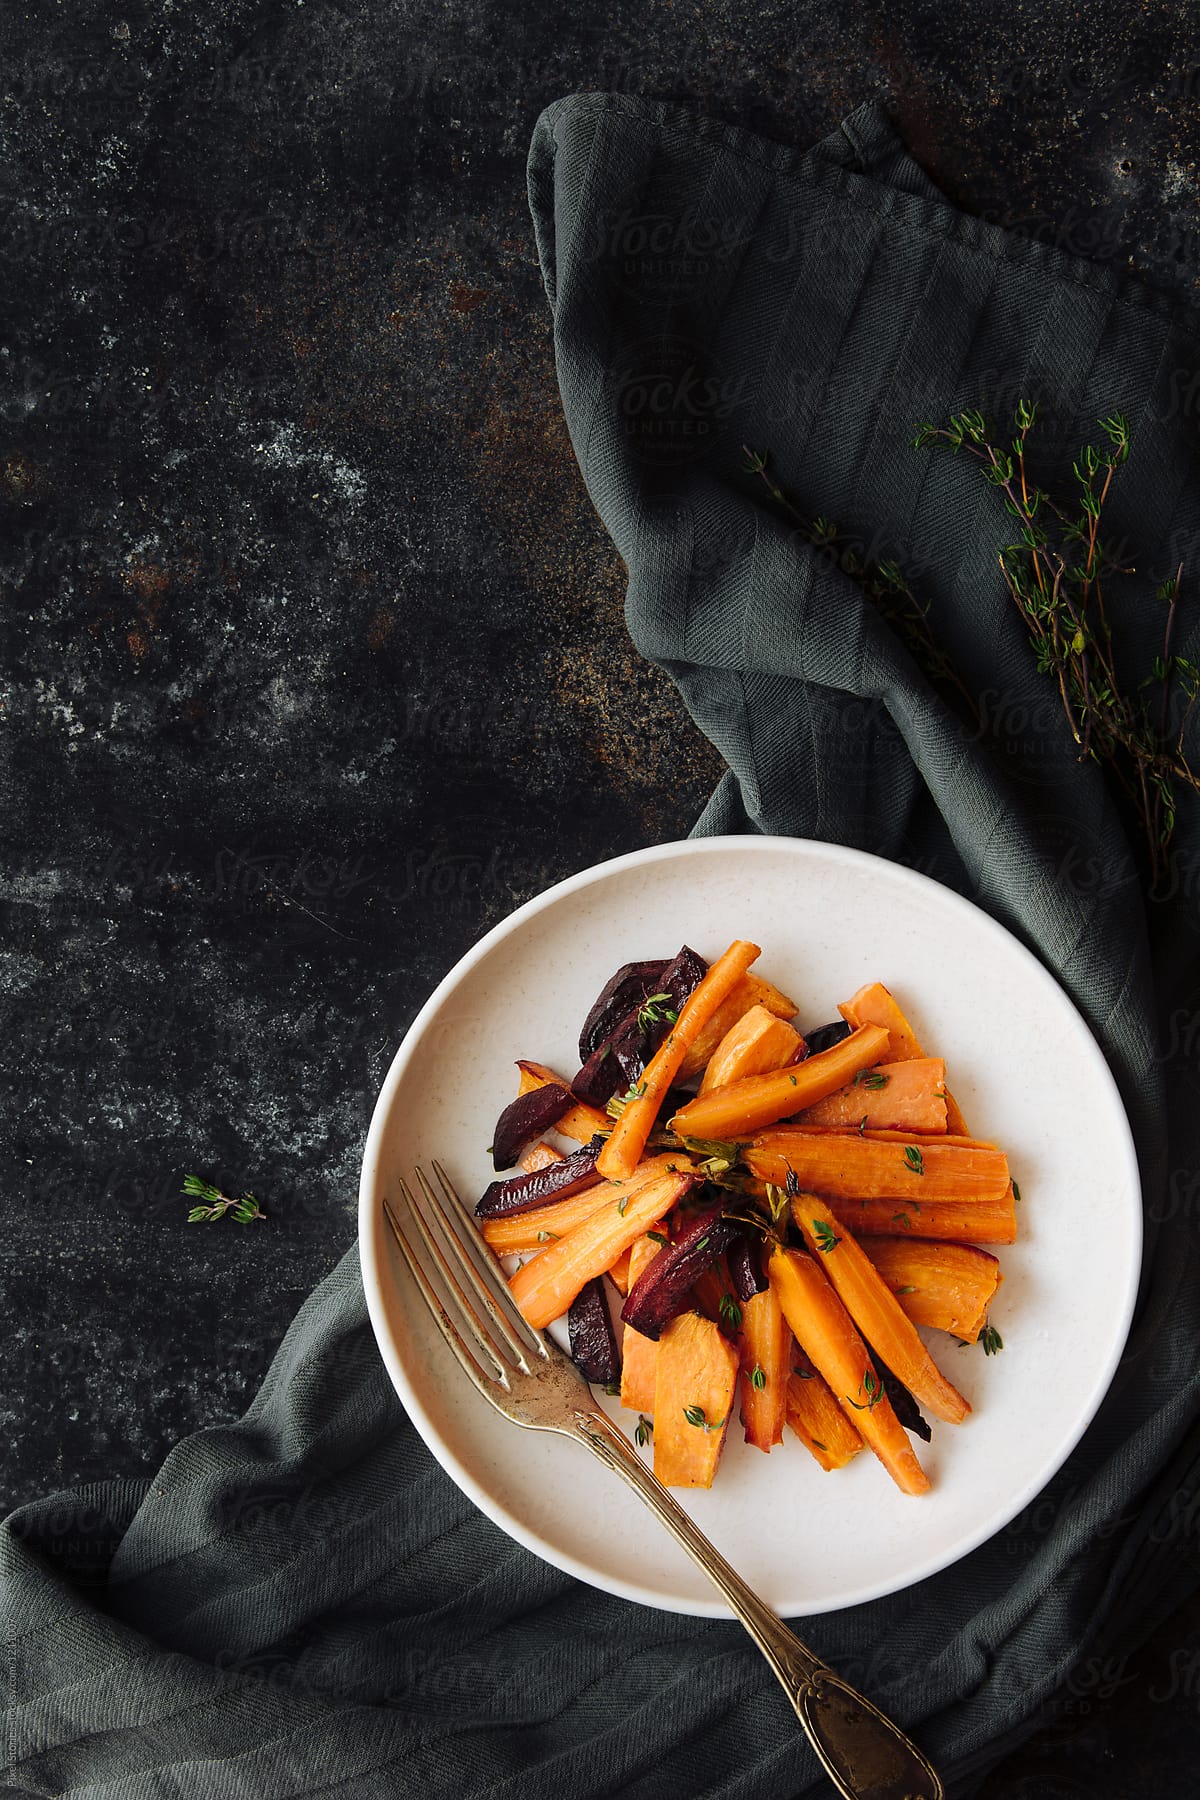 Baked sweet potatoes, beet and carrots with thyme salad